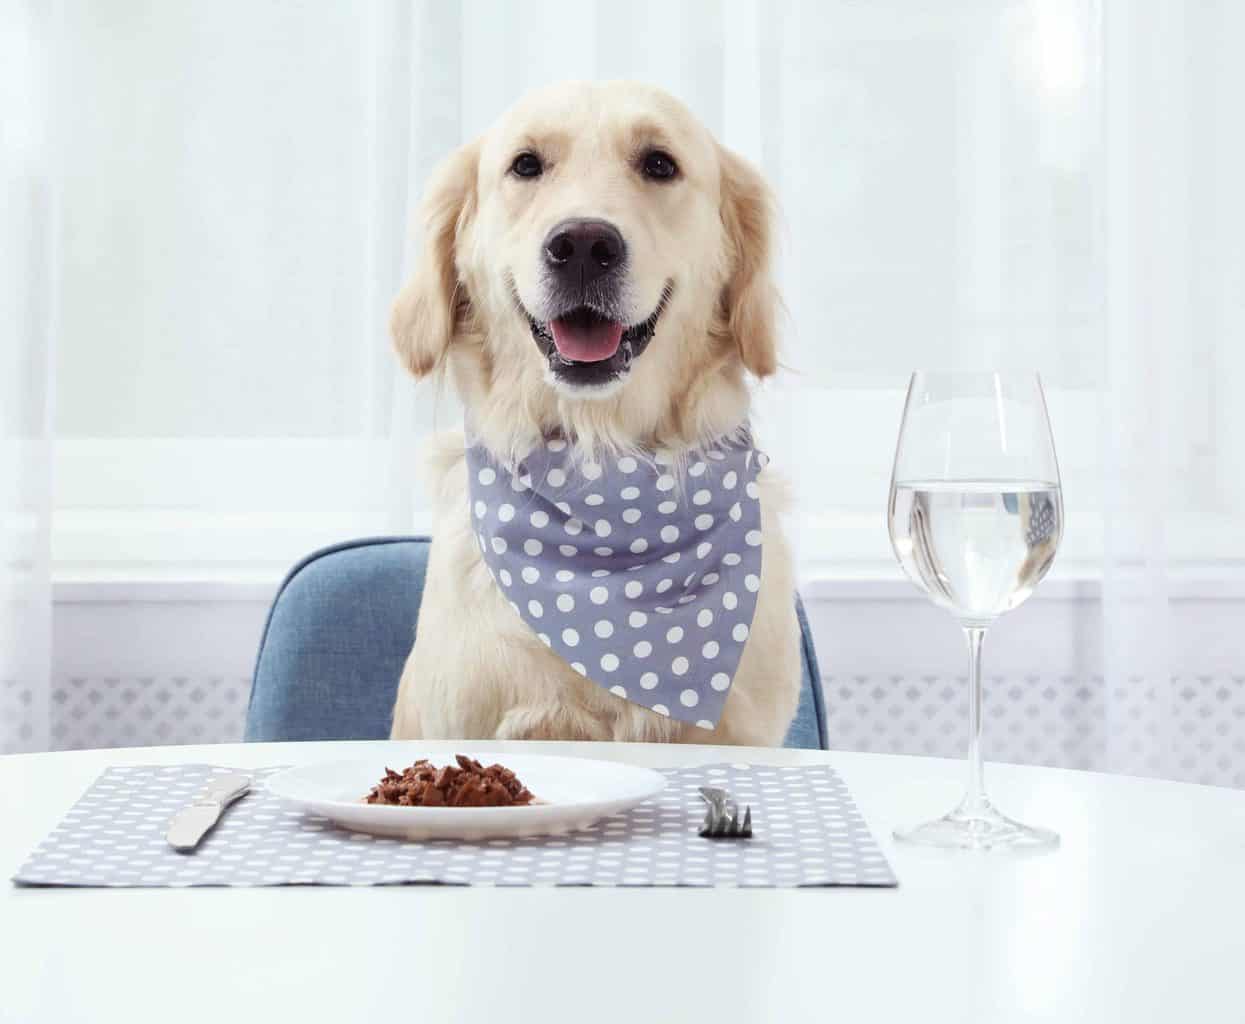 Happy golden retriever sits at table with meal on plate, silverware, water goblet. When creating a healthy meal plan for your dog, consider the nutrients your dog needs based on its age and activity level.